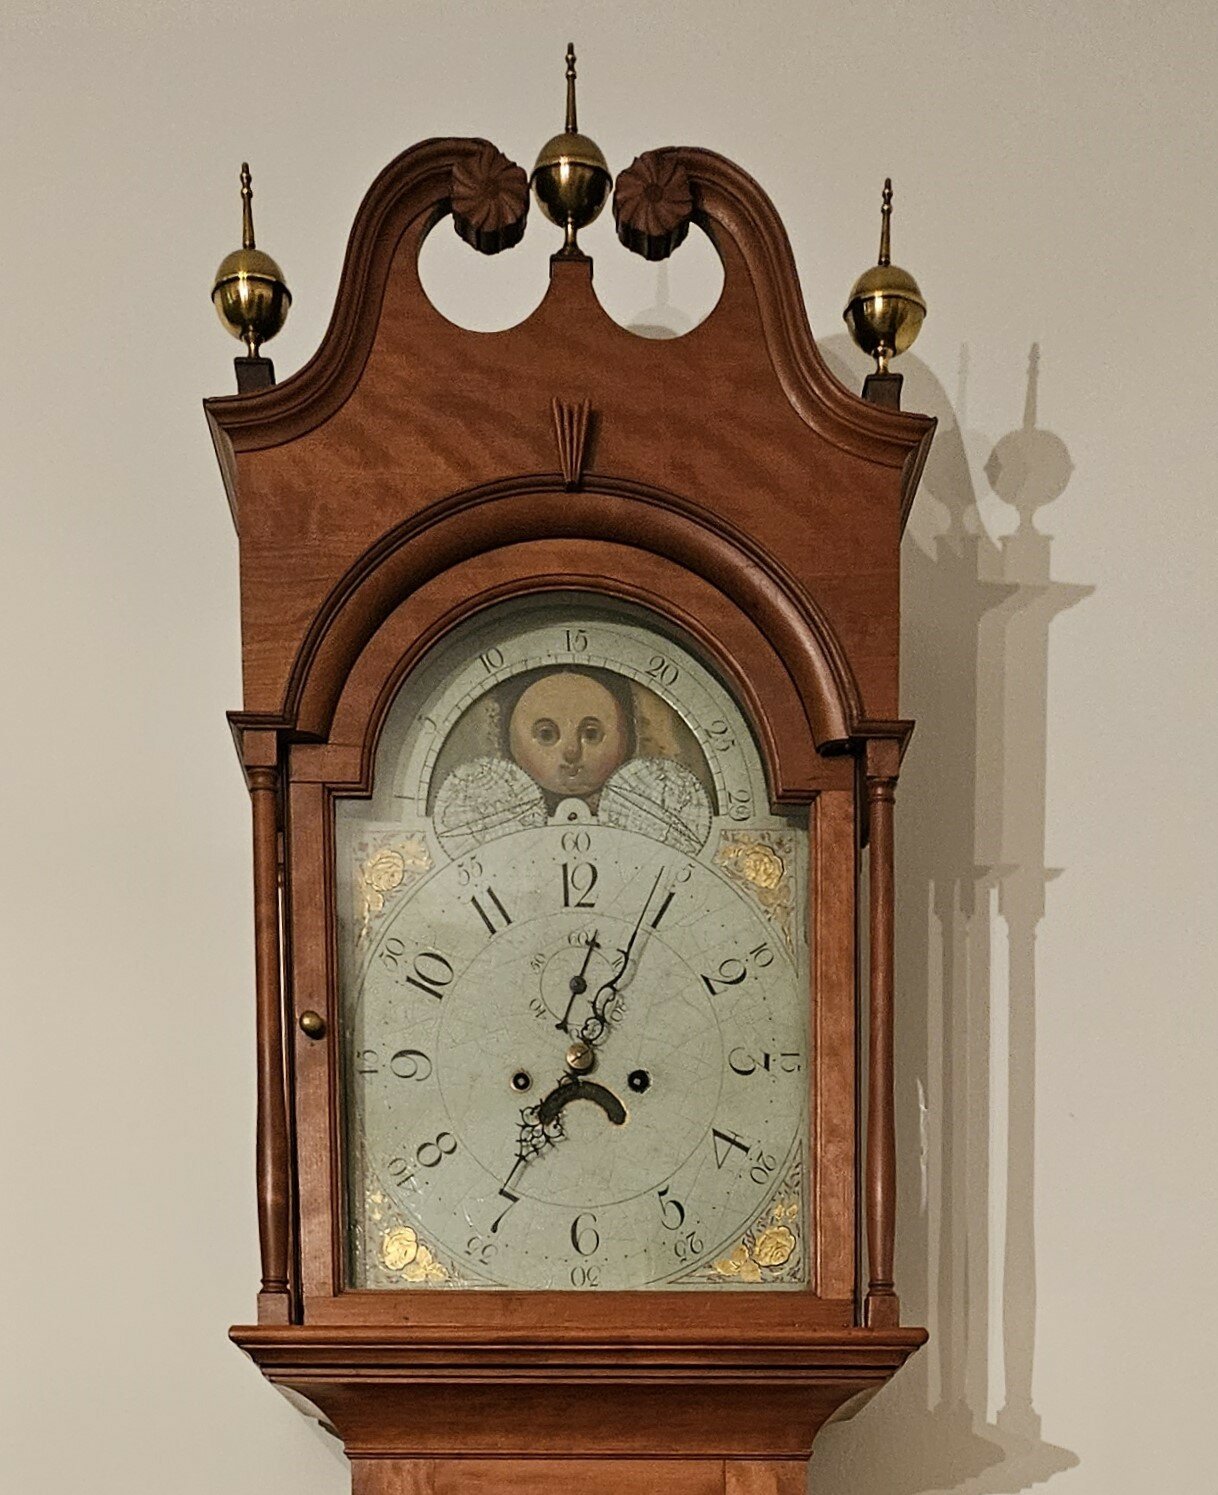 A 200-year-old grandfather clock that belonged to Benjamin Parry, the “Father of New Hope,” will be rededicated Sunday.